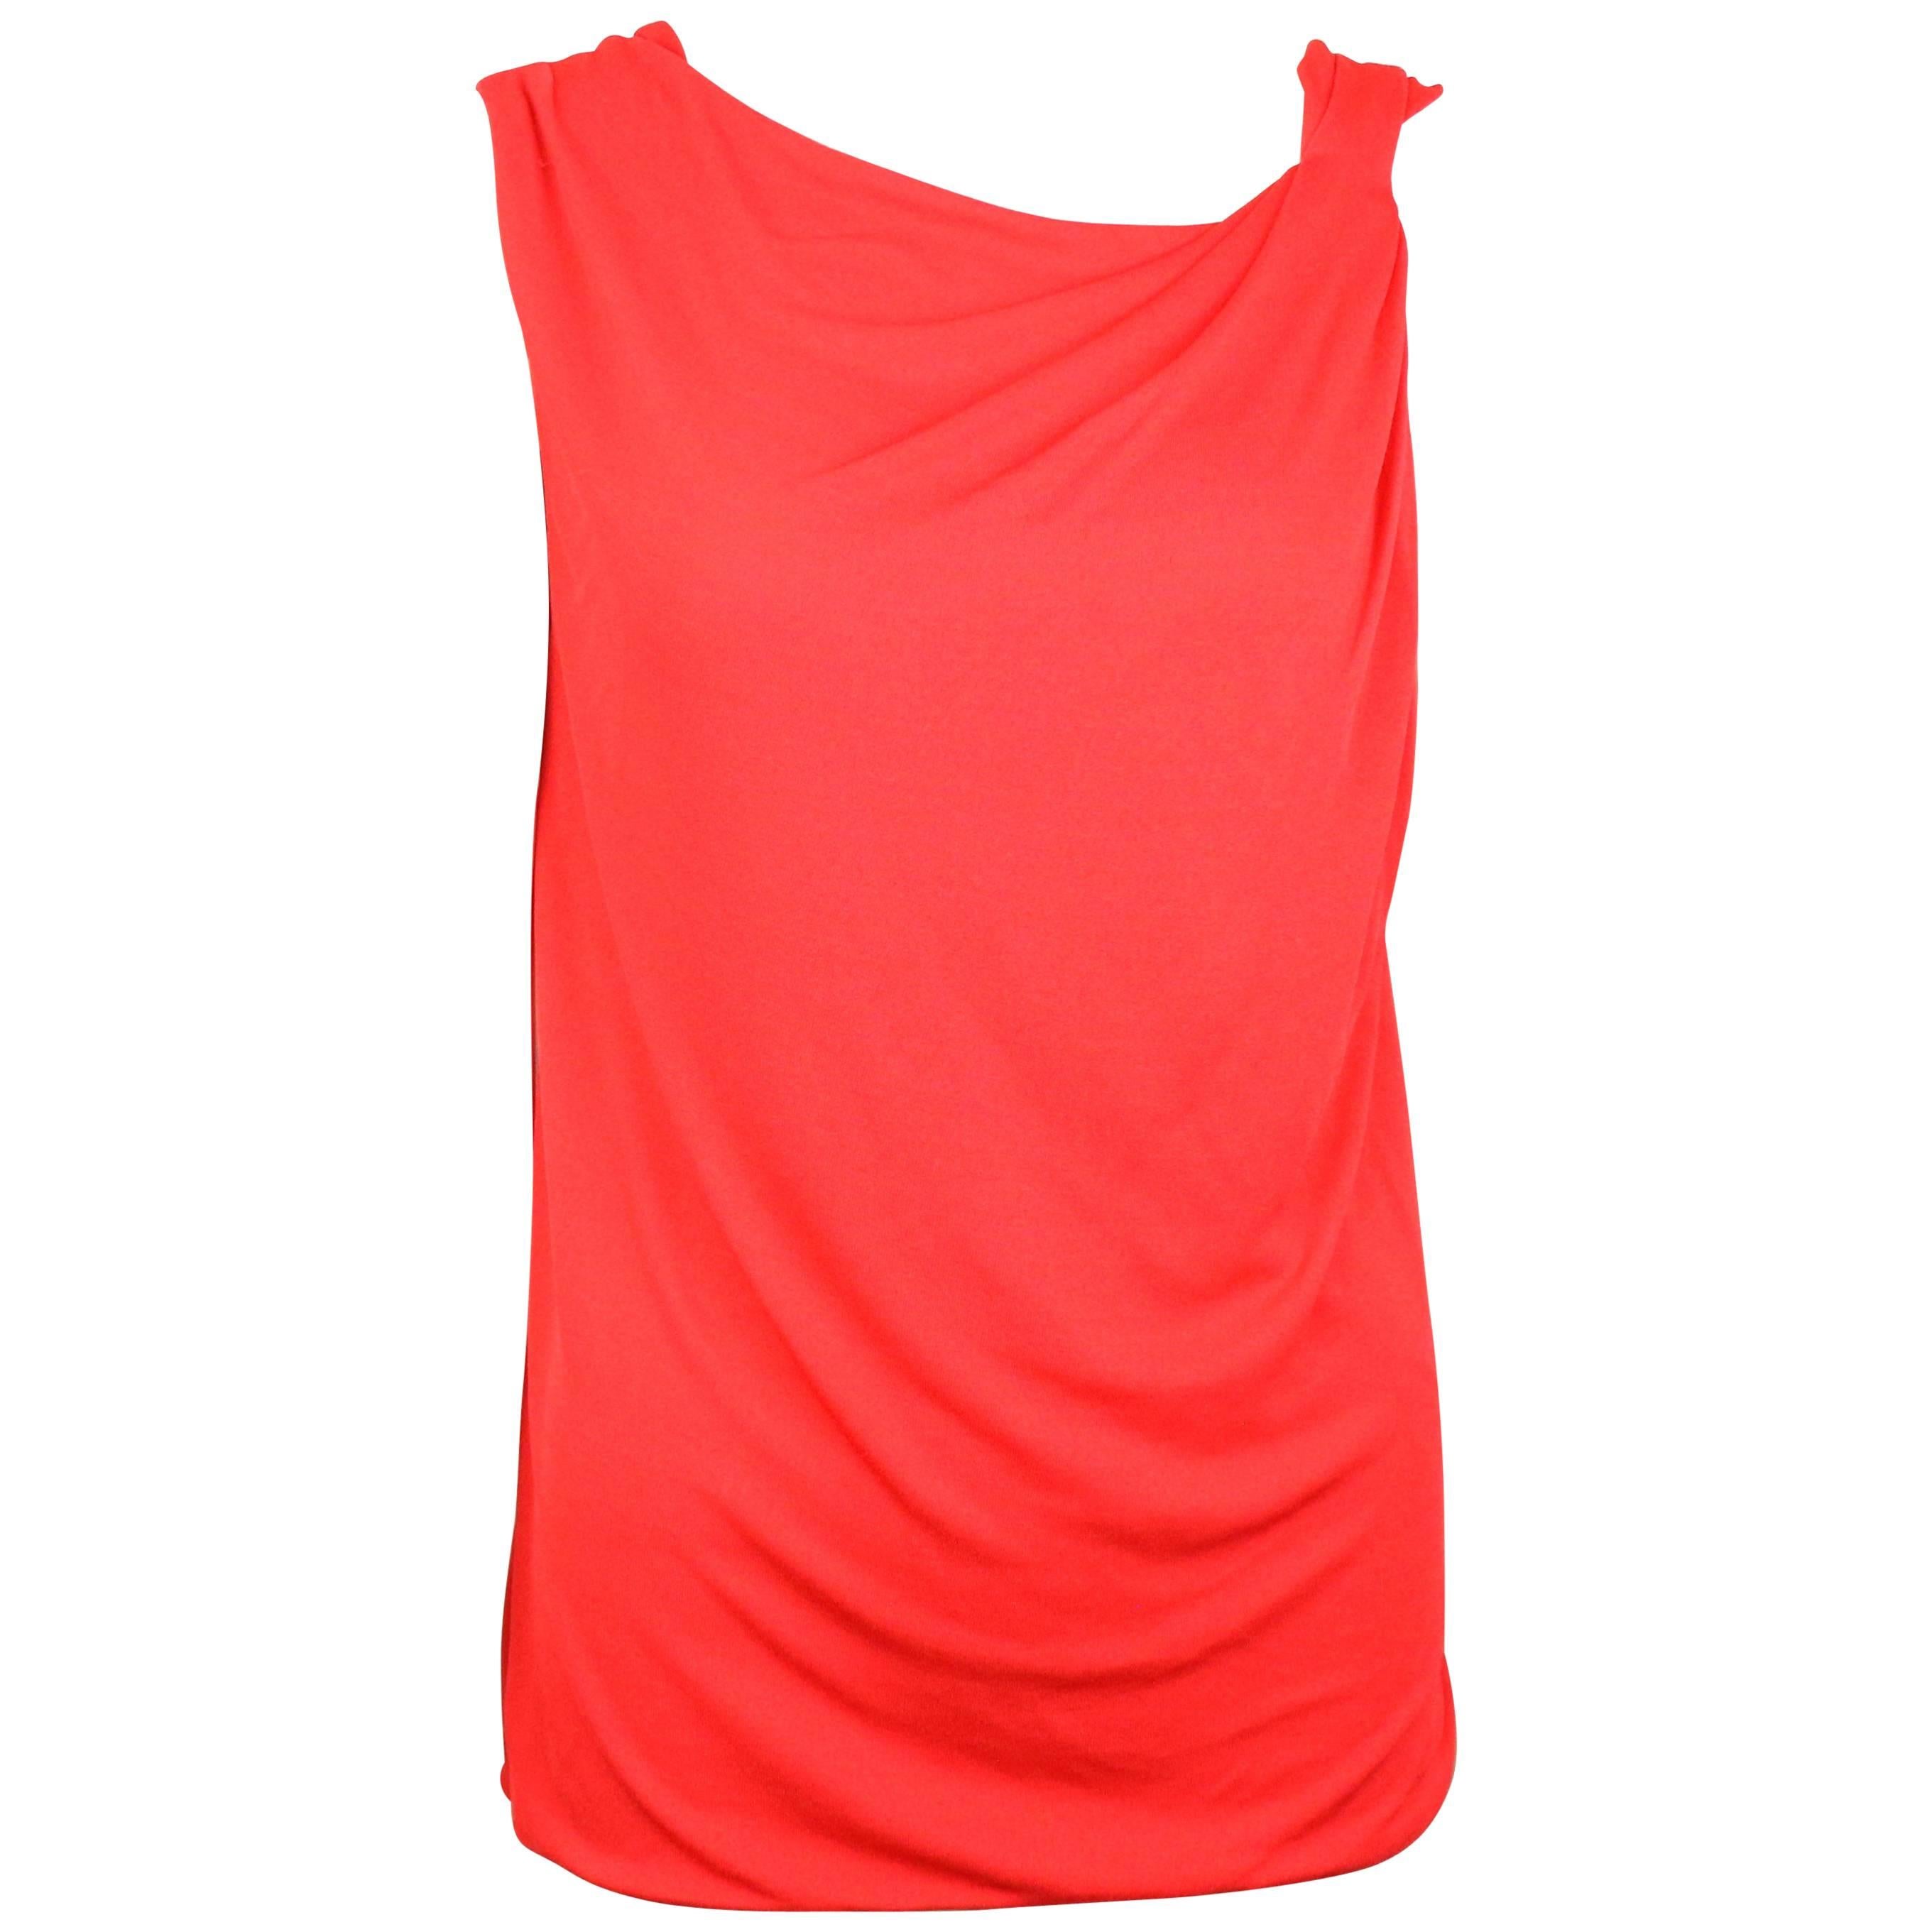 Gianni Versace Couture Red Asymmetric and Deep-V Cutting At Back Tank Top